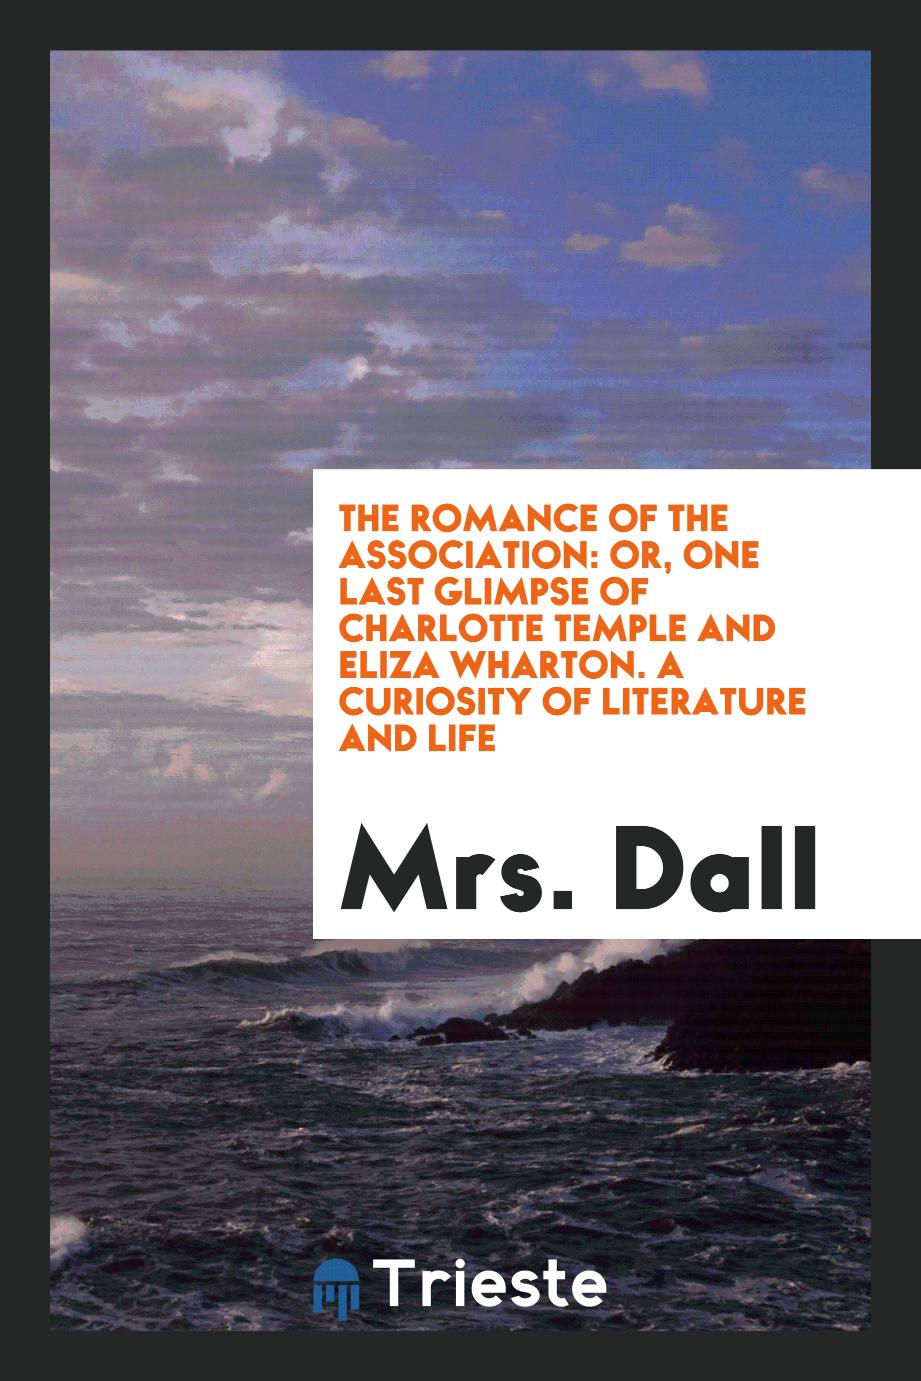 The Romance of the Association: Or, One Last Glimpse of Charlotte Temple and Eliza Wharton. A Curiosity of Literature and Life